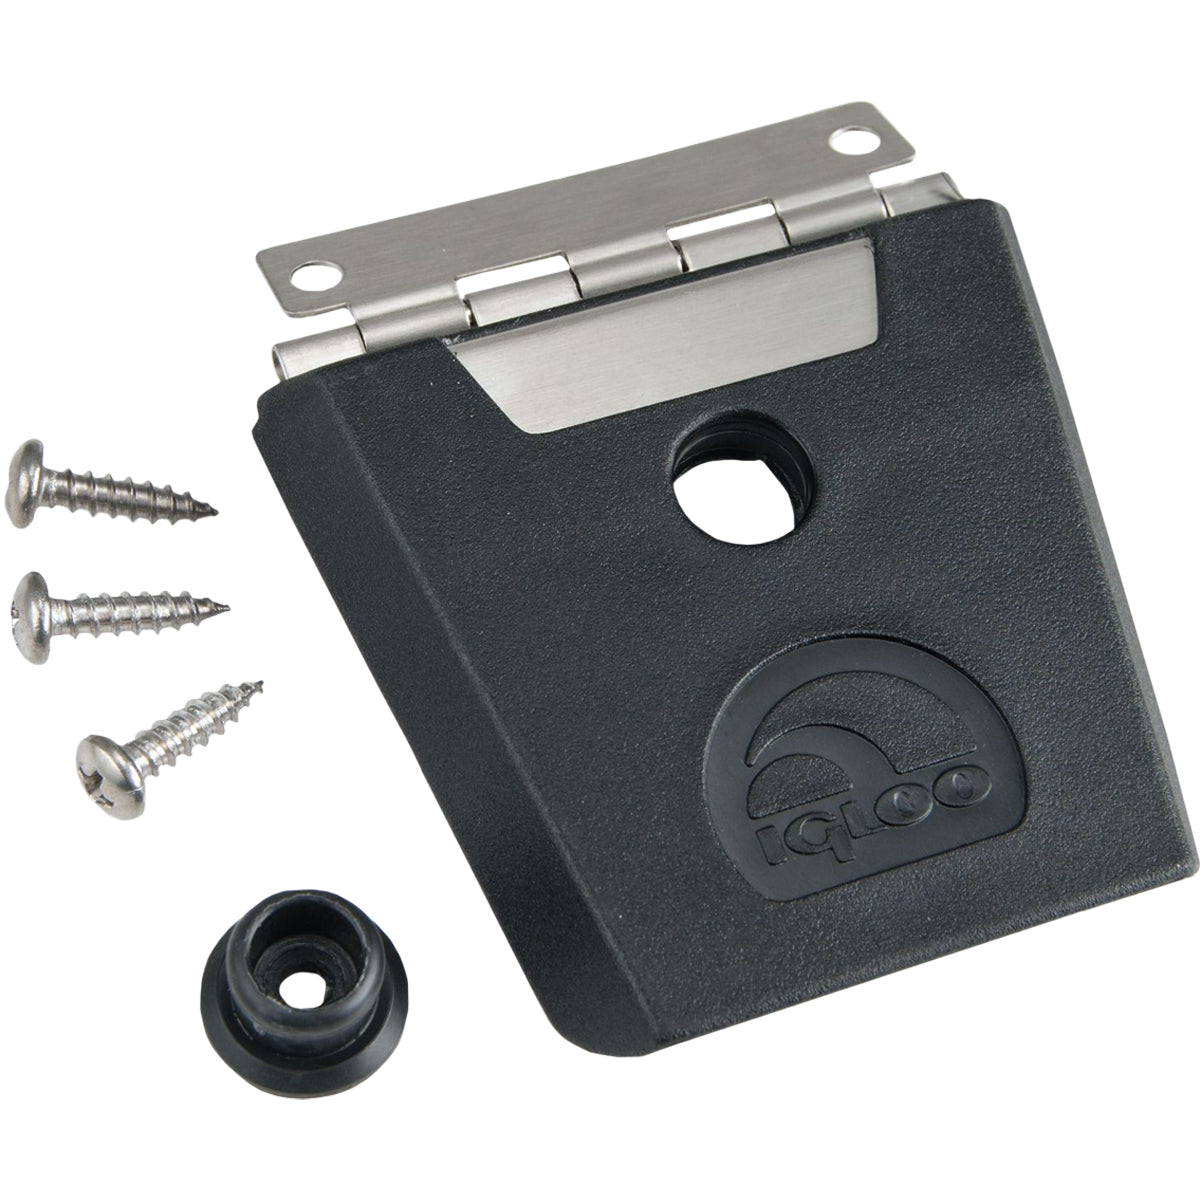 IGLOO Replacement Hybrid Cooler Latch - Black/Stainless Steel IGLOO